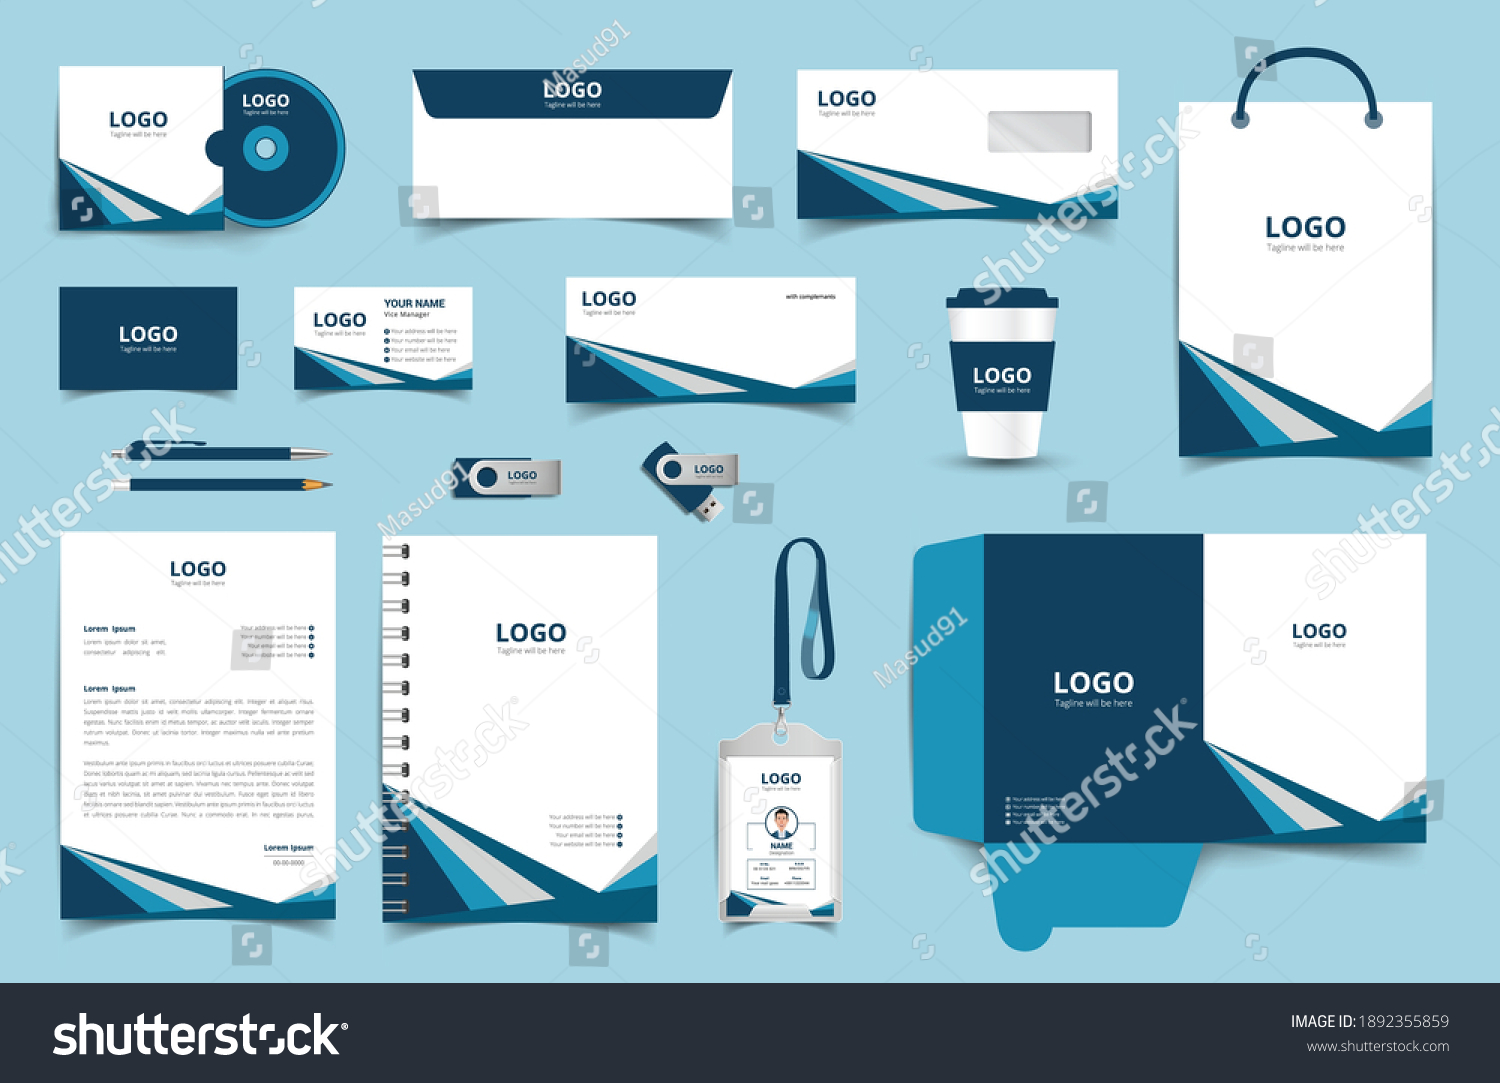 Corporate Brand Identity Mockup set with digital elements. Classic full stationery template design. Editable vector illustration: Business card, Bag, Id card, envelope, cup, letterhead, pen etc. #1892355859